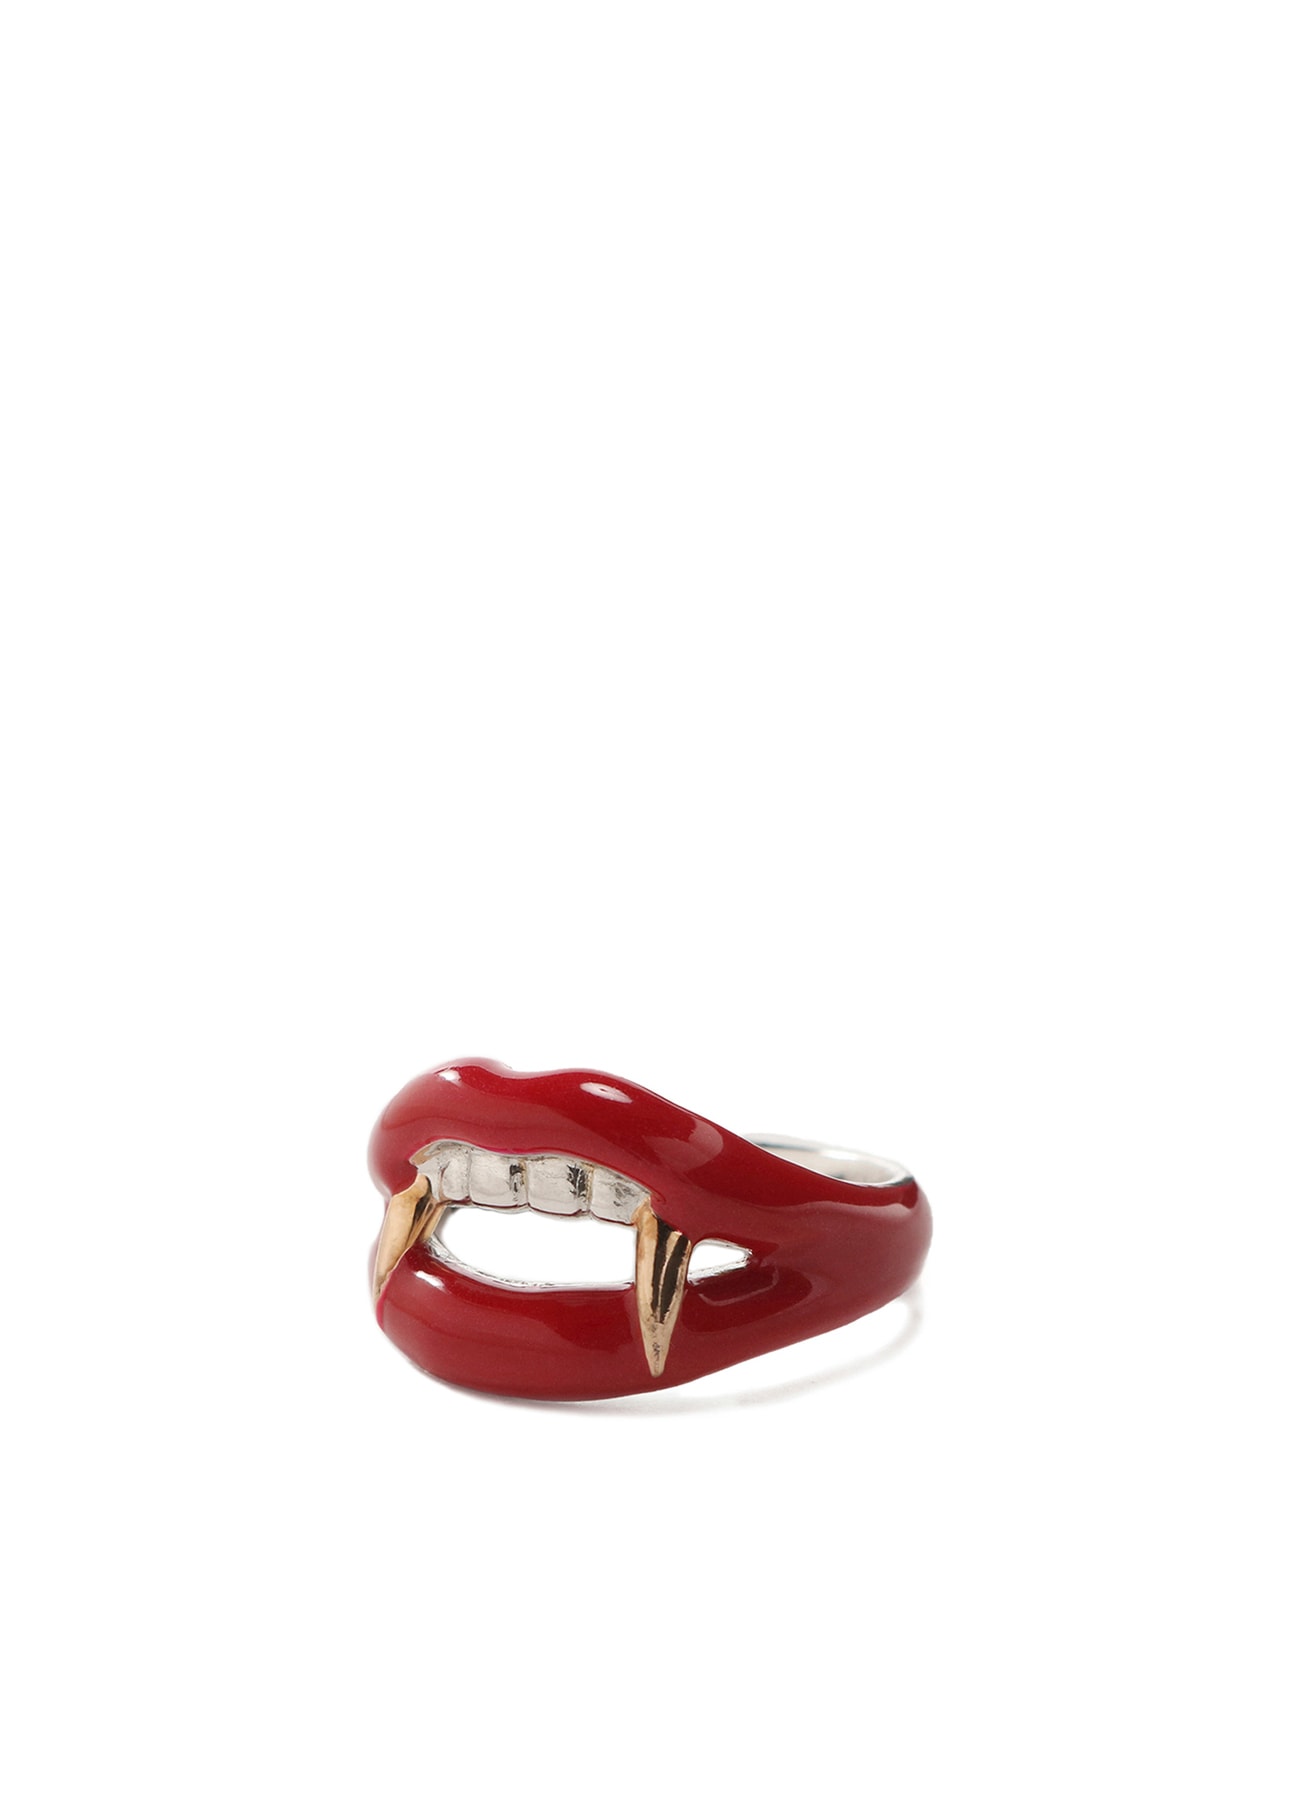 SILVER 950 VAMPIRE FANG RING ROUGE